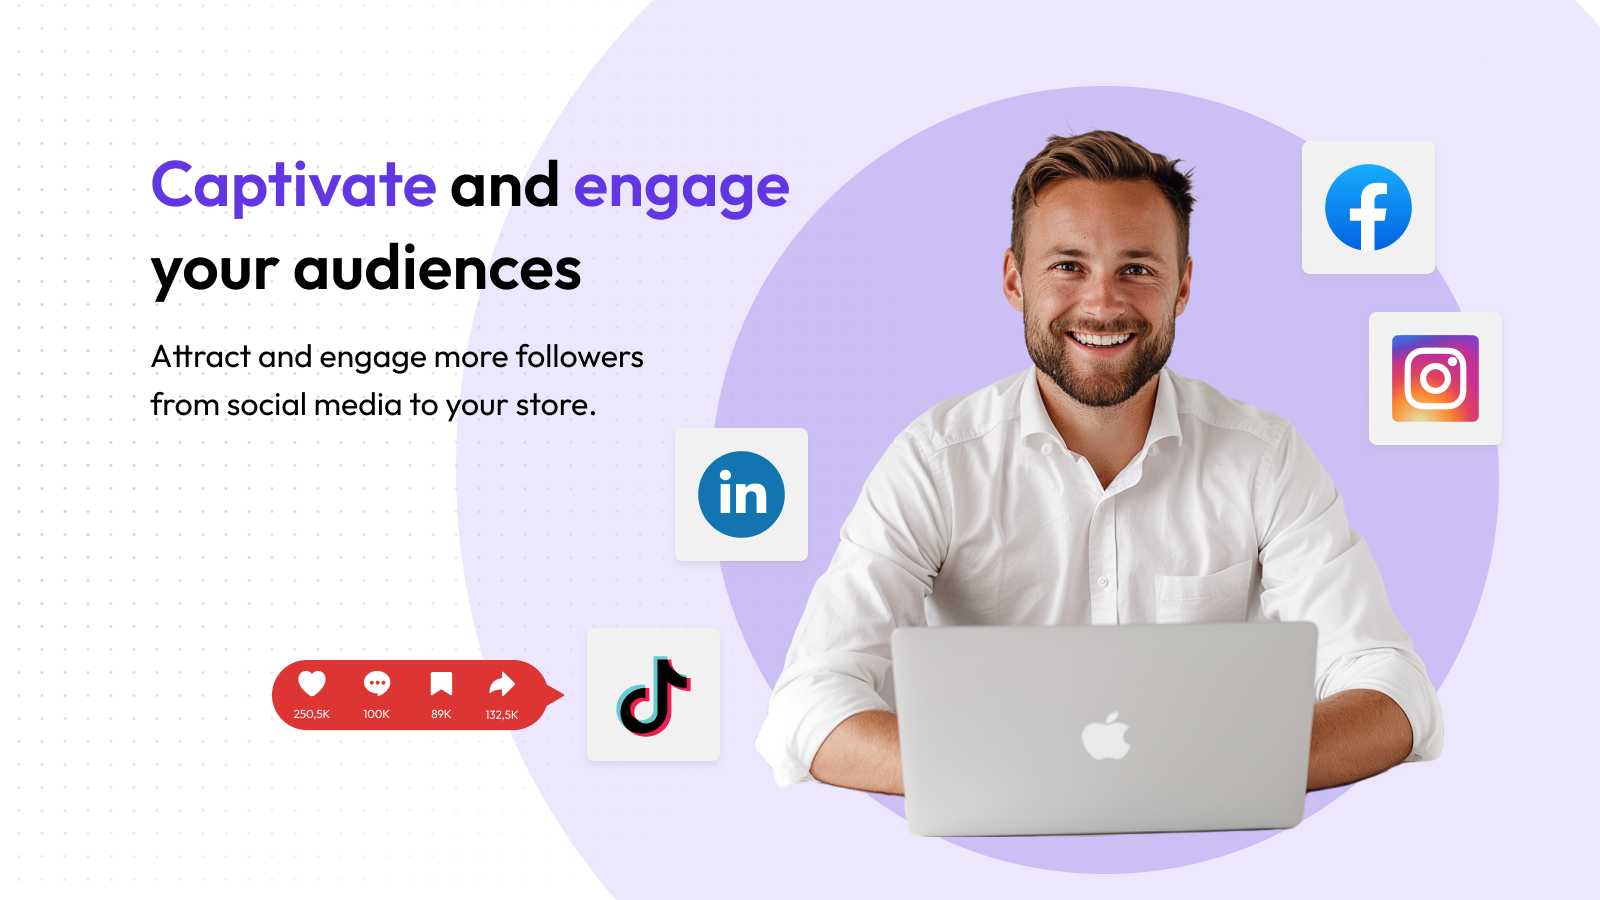 Captivate and engage your audiences with social marketing